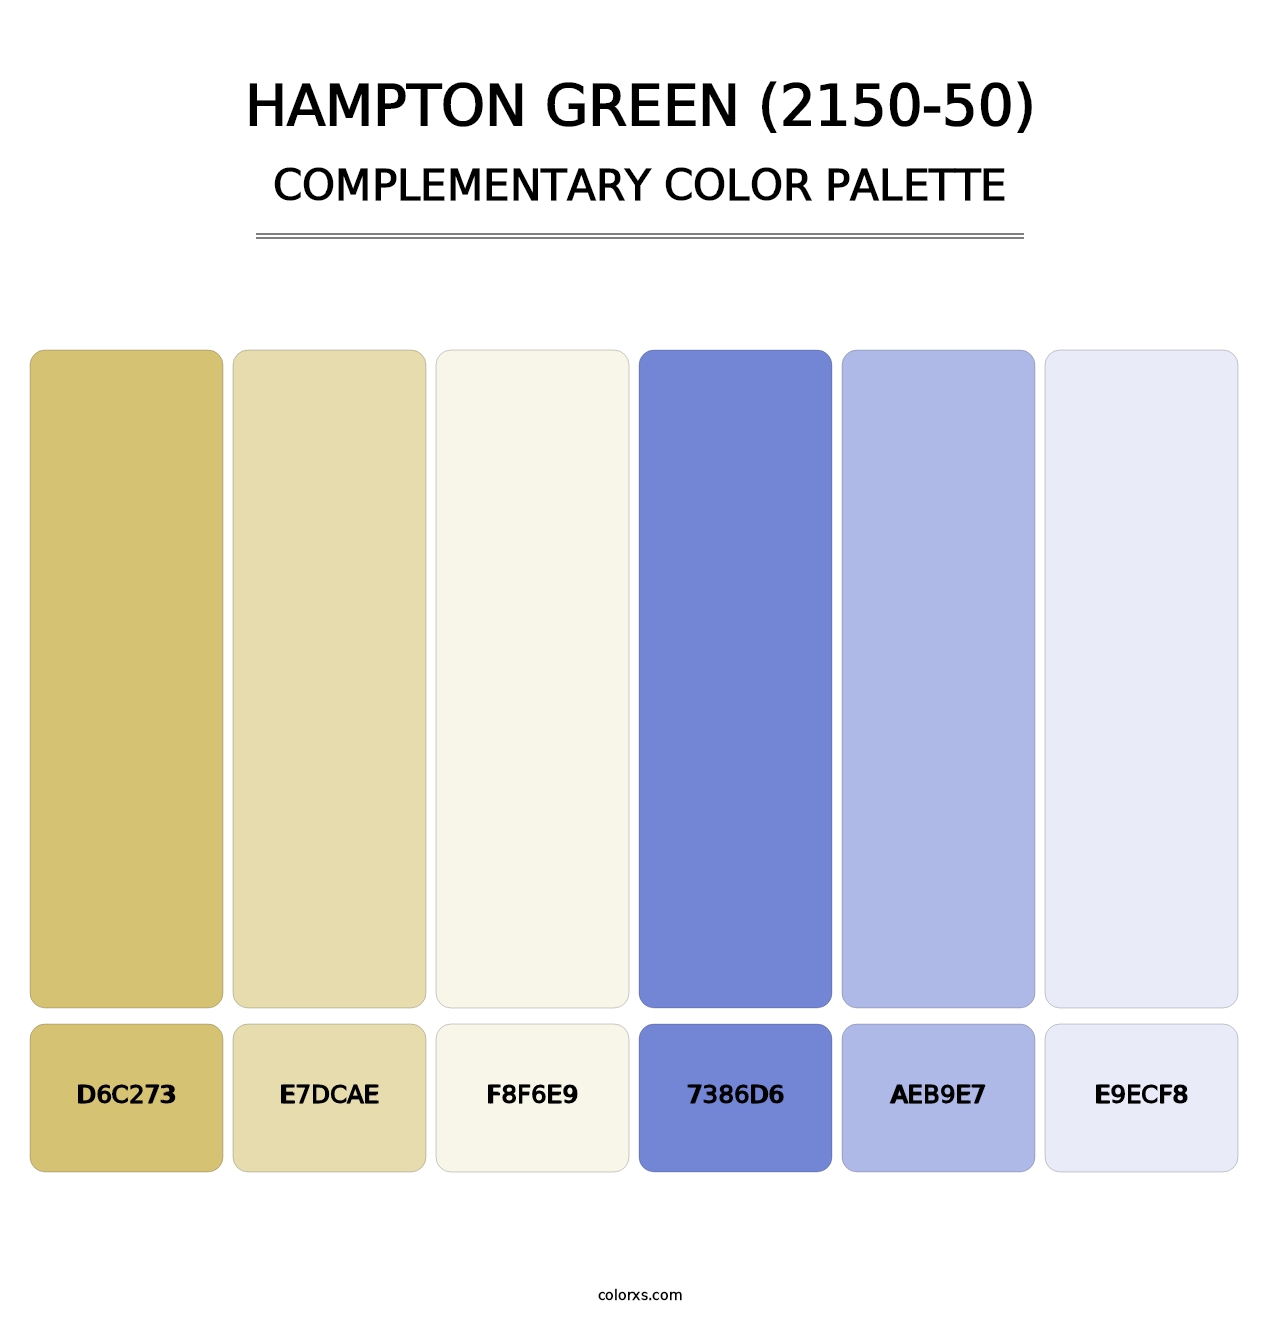 Hampton Green (2150-50) - Complementary Color Palette